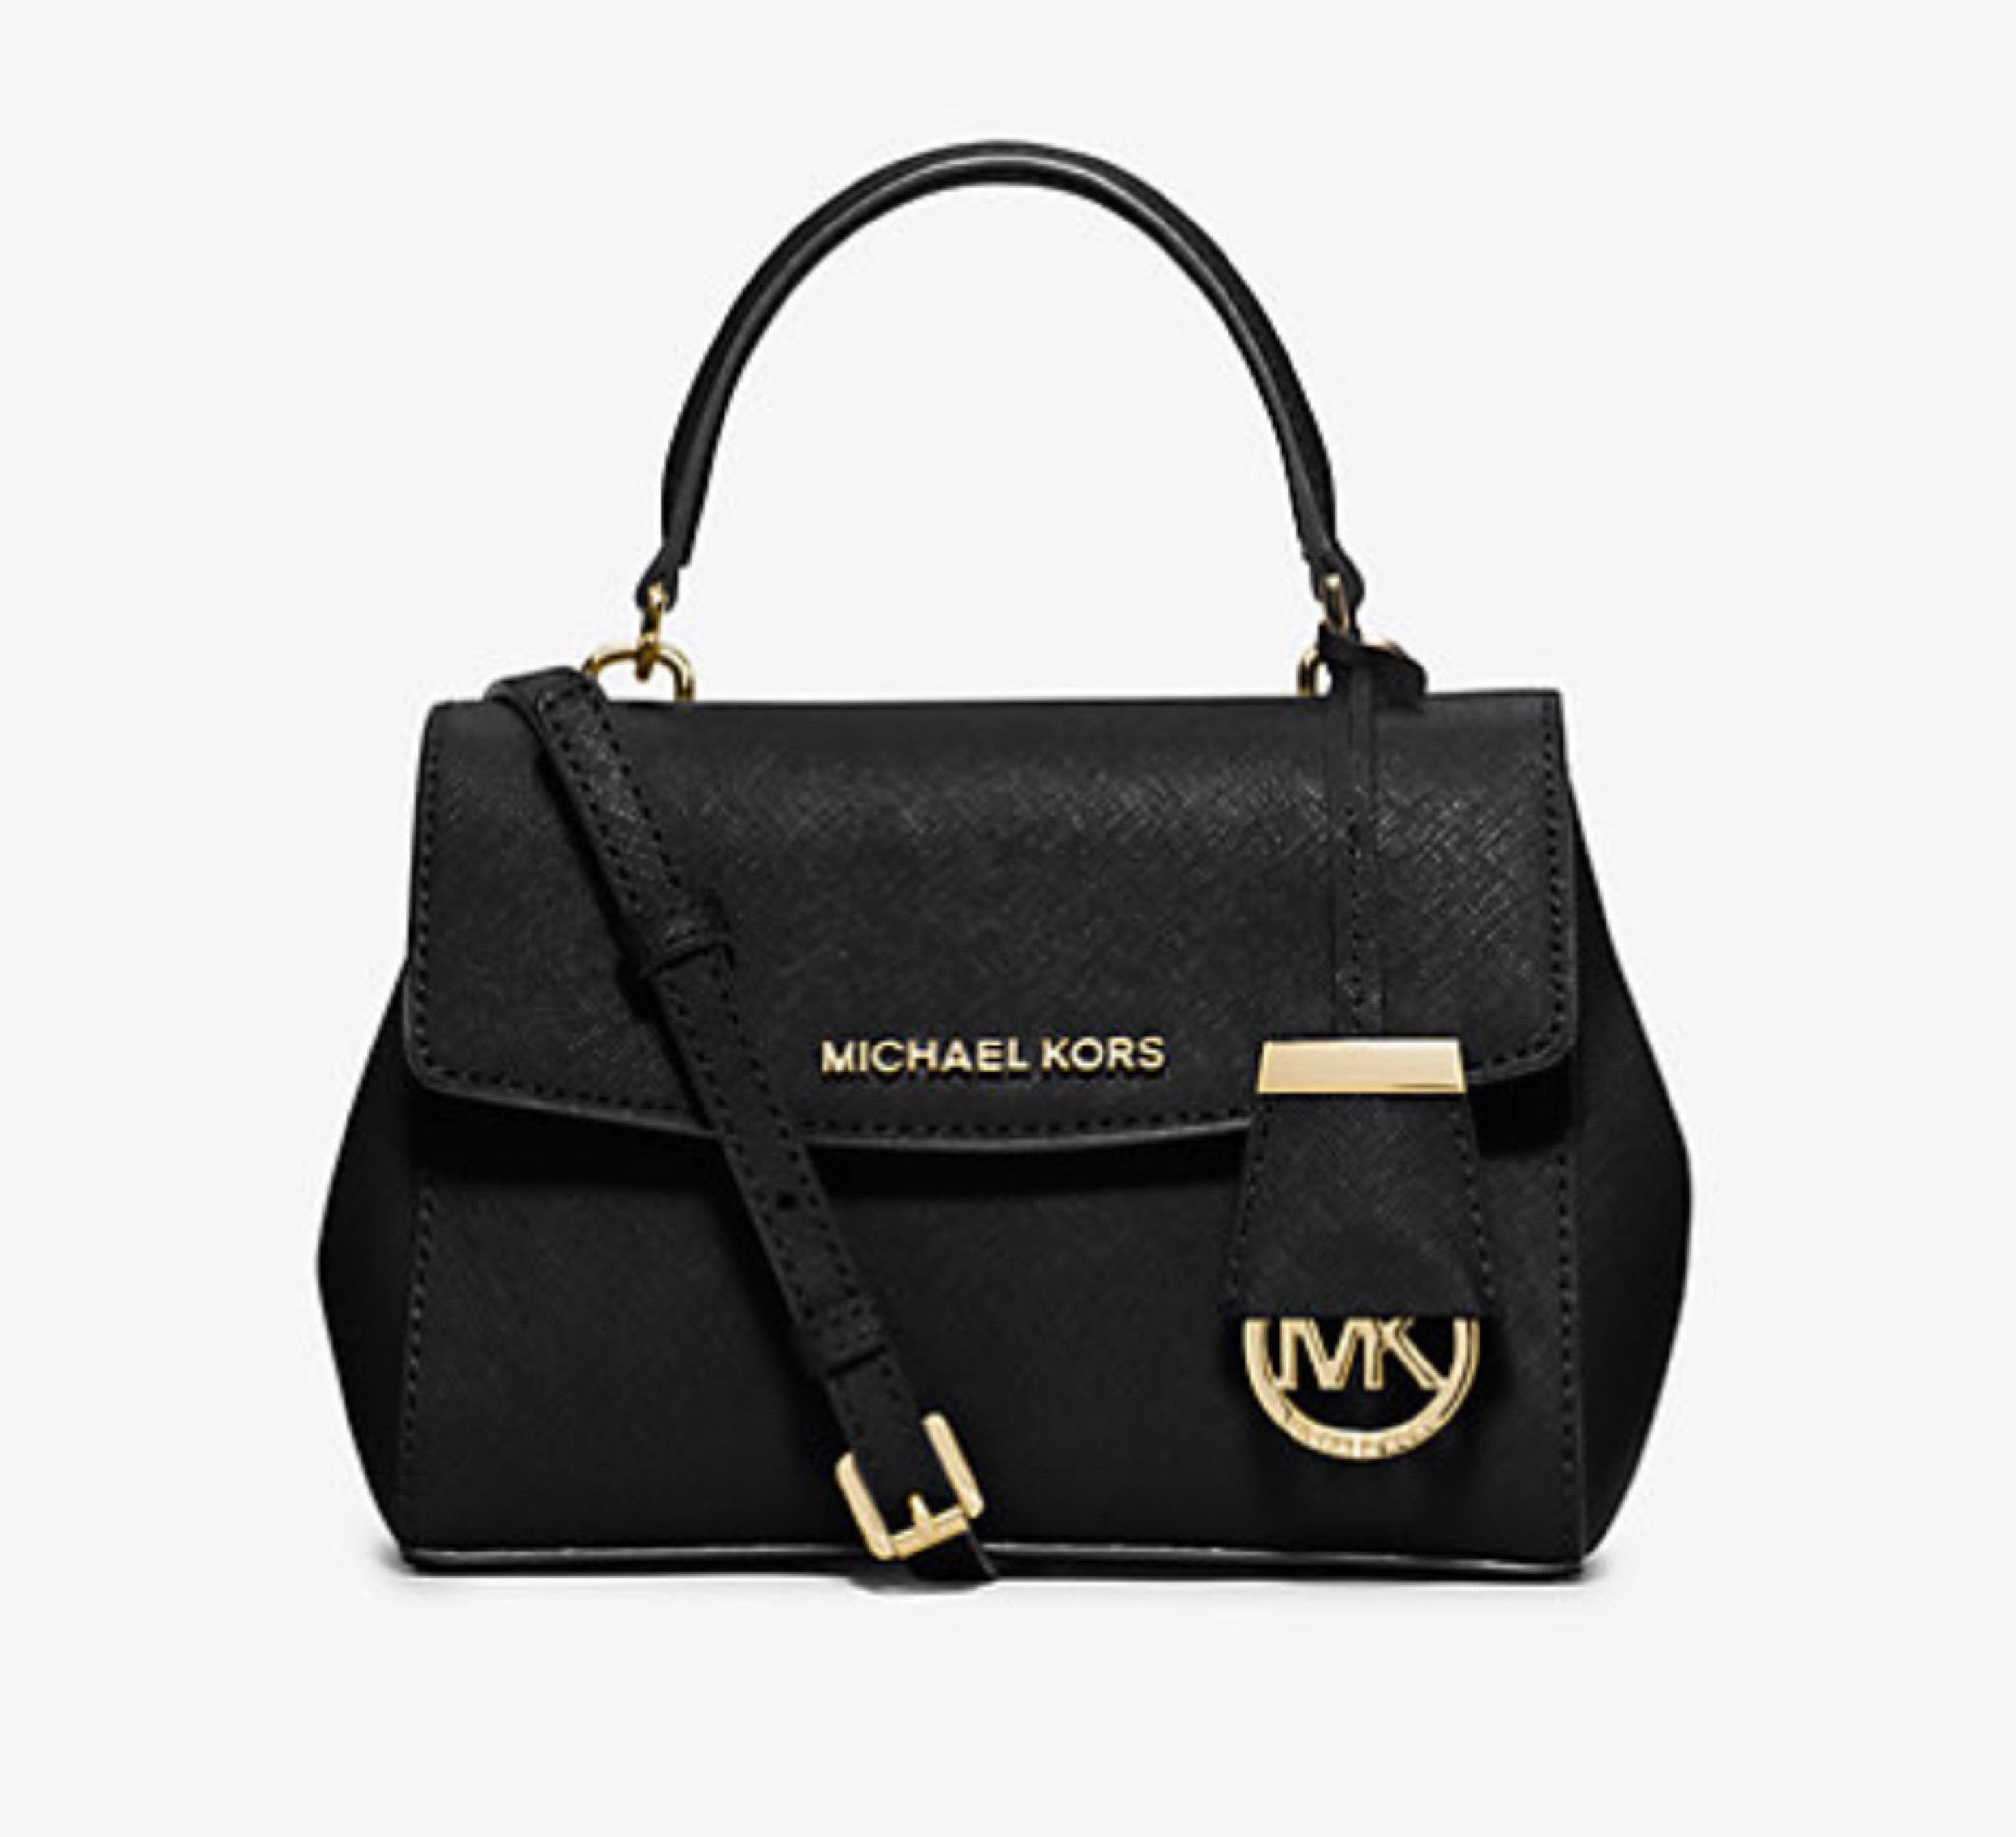 Michael Kors Ava Small Top Handle Leather Satchel with Black Bow